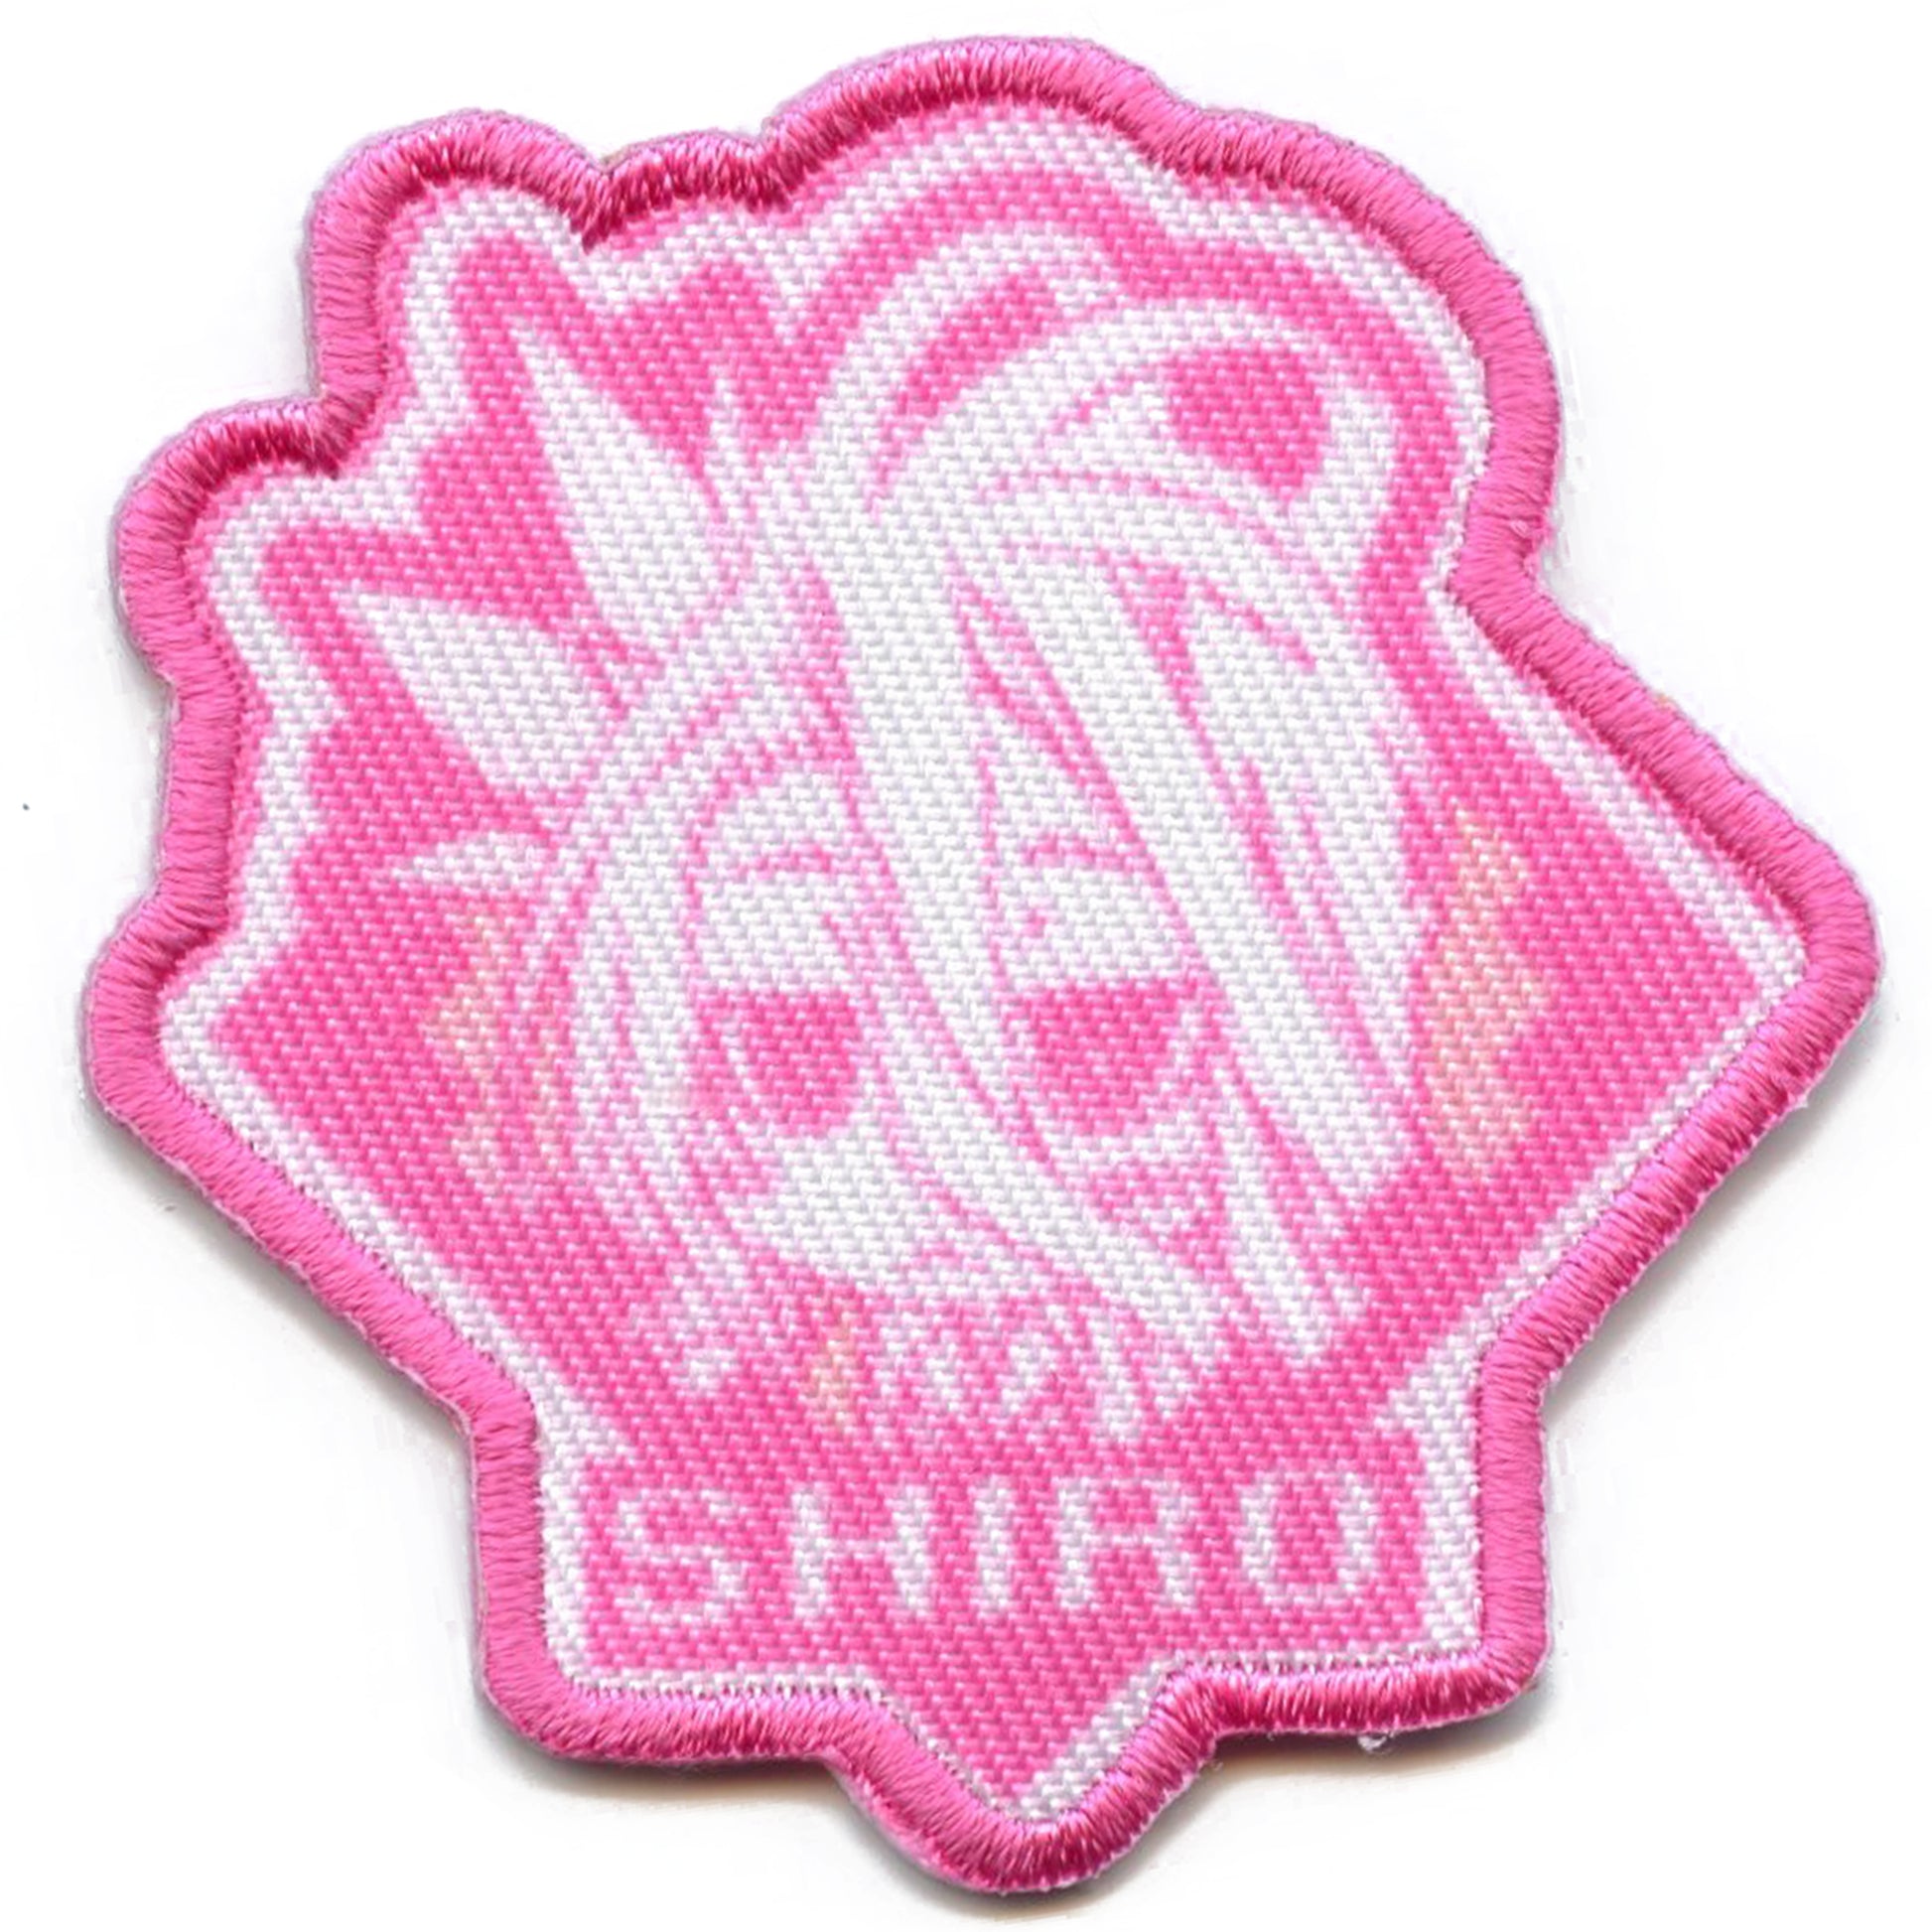 No Game No Life Shiro Anime Embroidered Sublimation Iron On Patch 